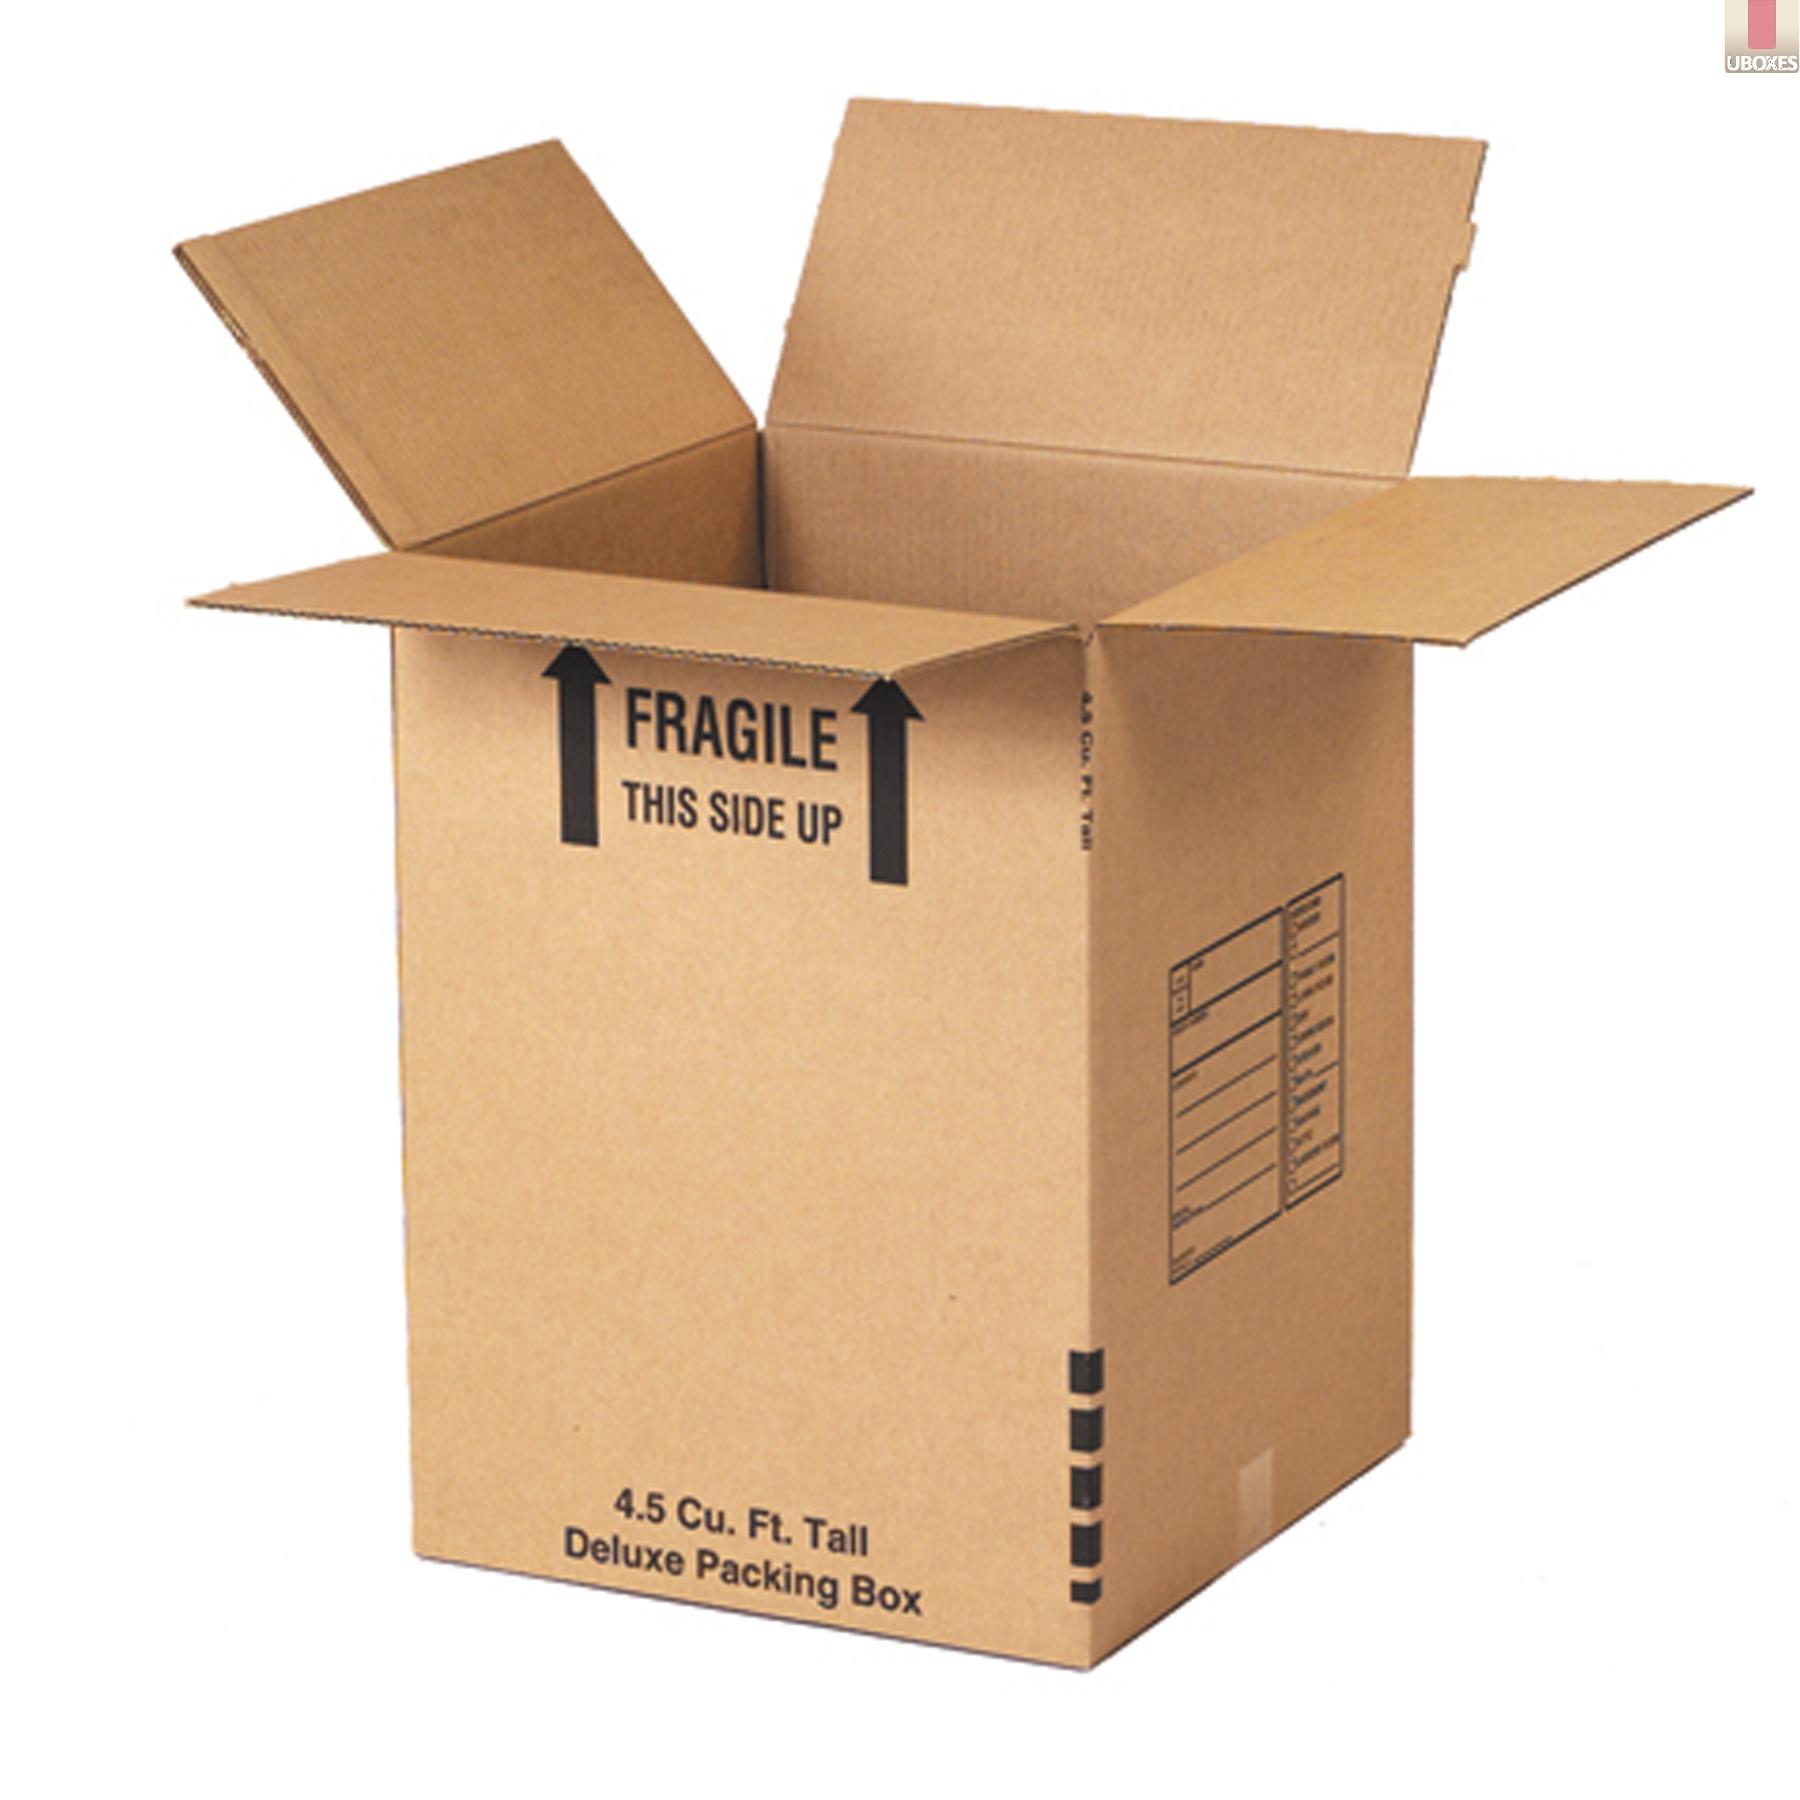 Uboxes Corrugated Moving Boxes With Handles 10 Premium Large 18 X 18